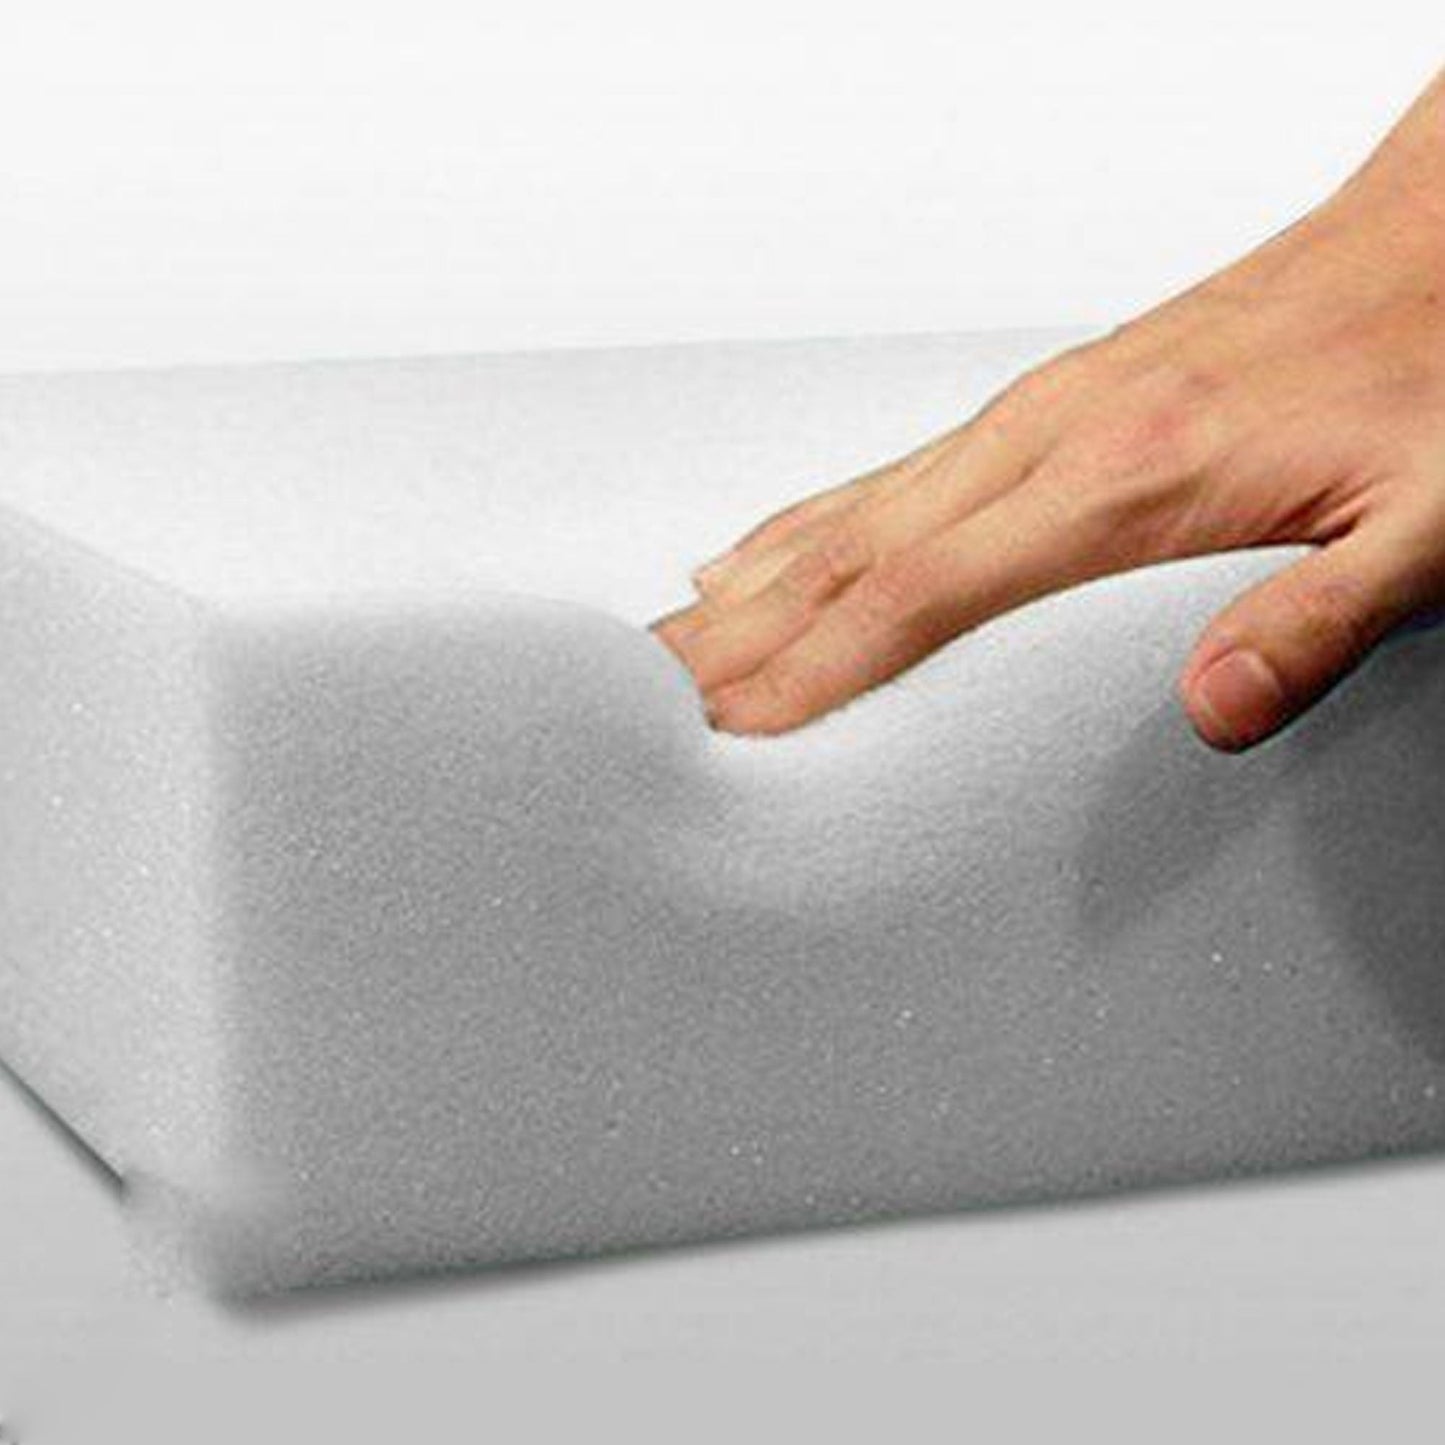 6 INCH Upholstery Foam Cushions High Density Seat Pad Replacement - TheComfortshop.co.ukFurniturethecomfortshopTheComfortshop.co.ukCUT FOAM 30 X 30 X 6 INCH30 X 30 INCHES6 INCH Upholstery Foam Cushions High Density Seat Pad Replacement - TheComfortshop.co.uk